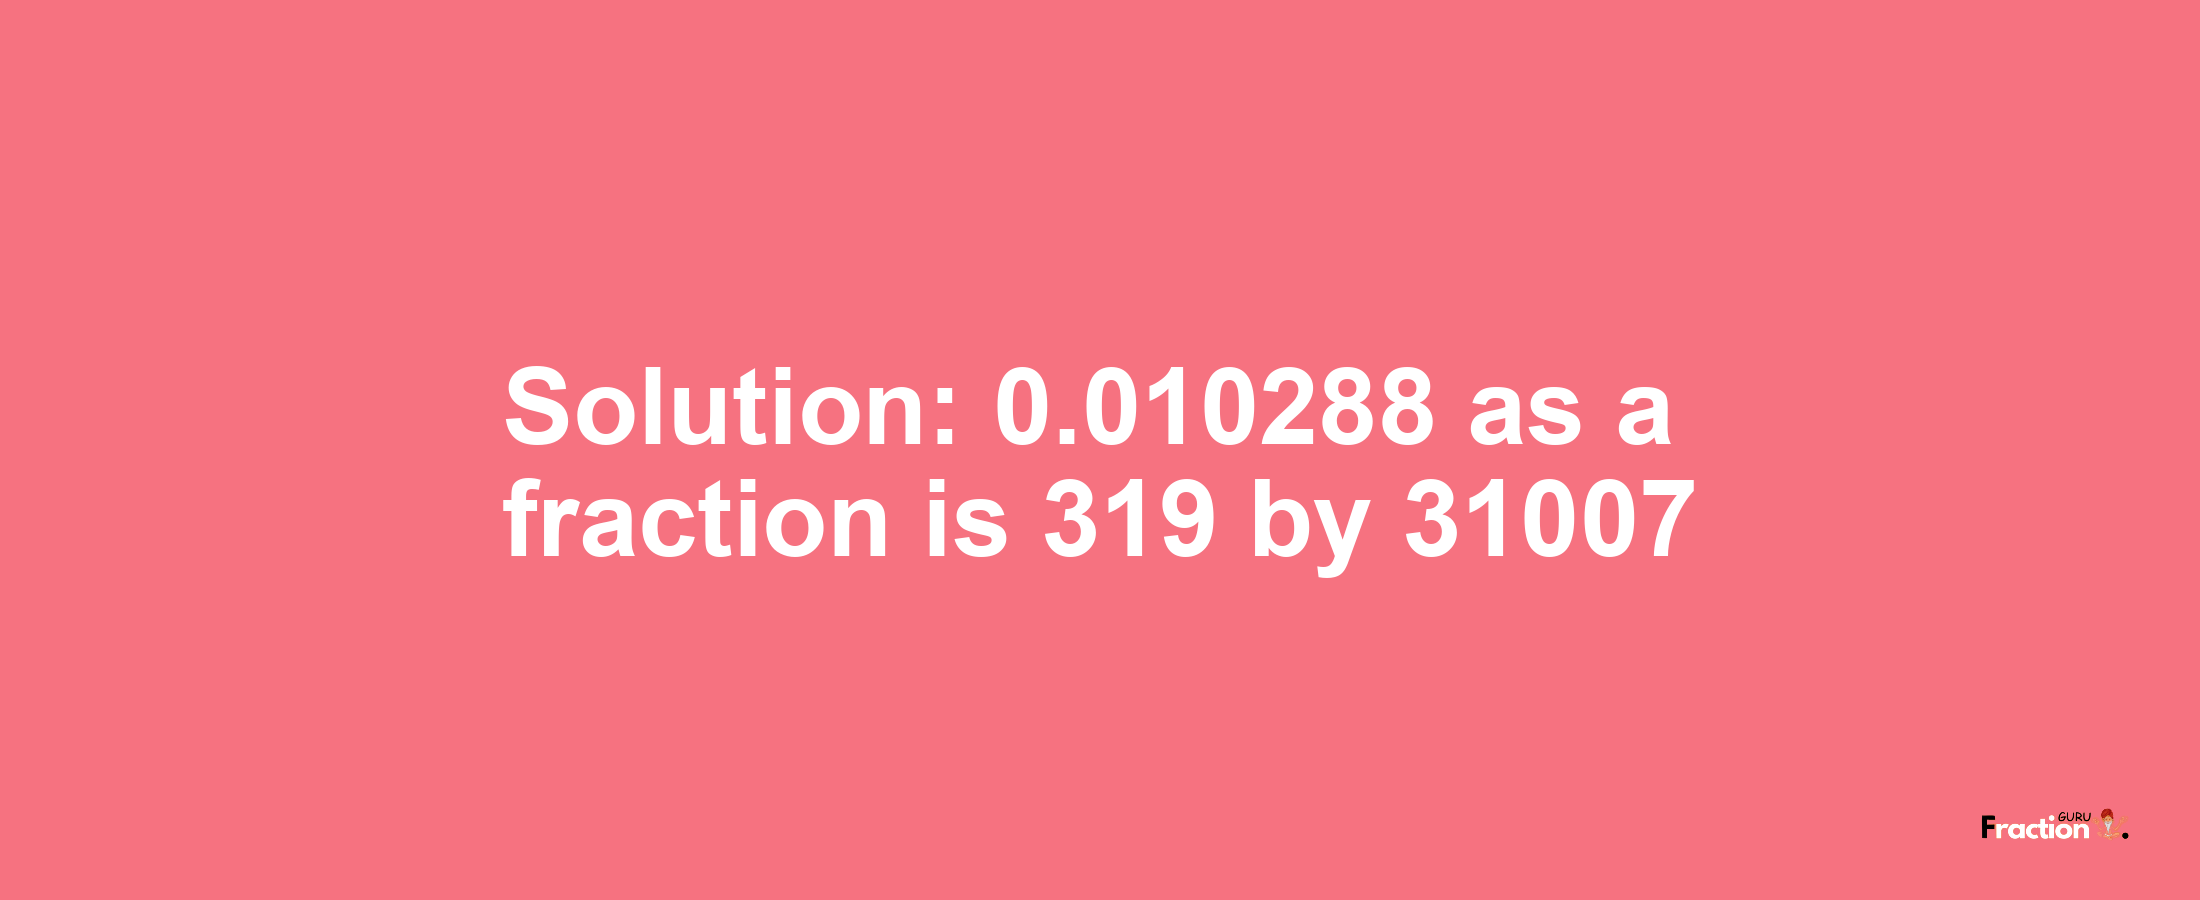 Solution:0.010288 as a fraction is 319/31007